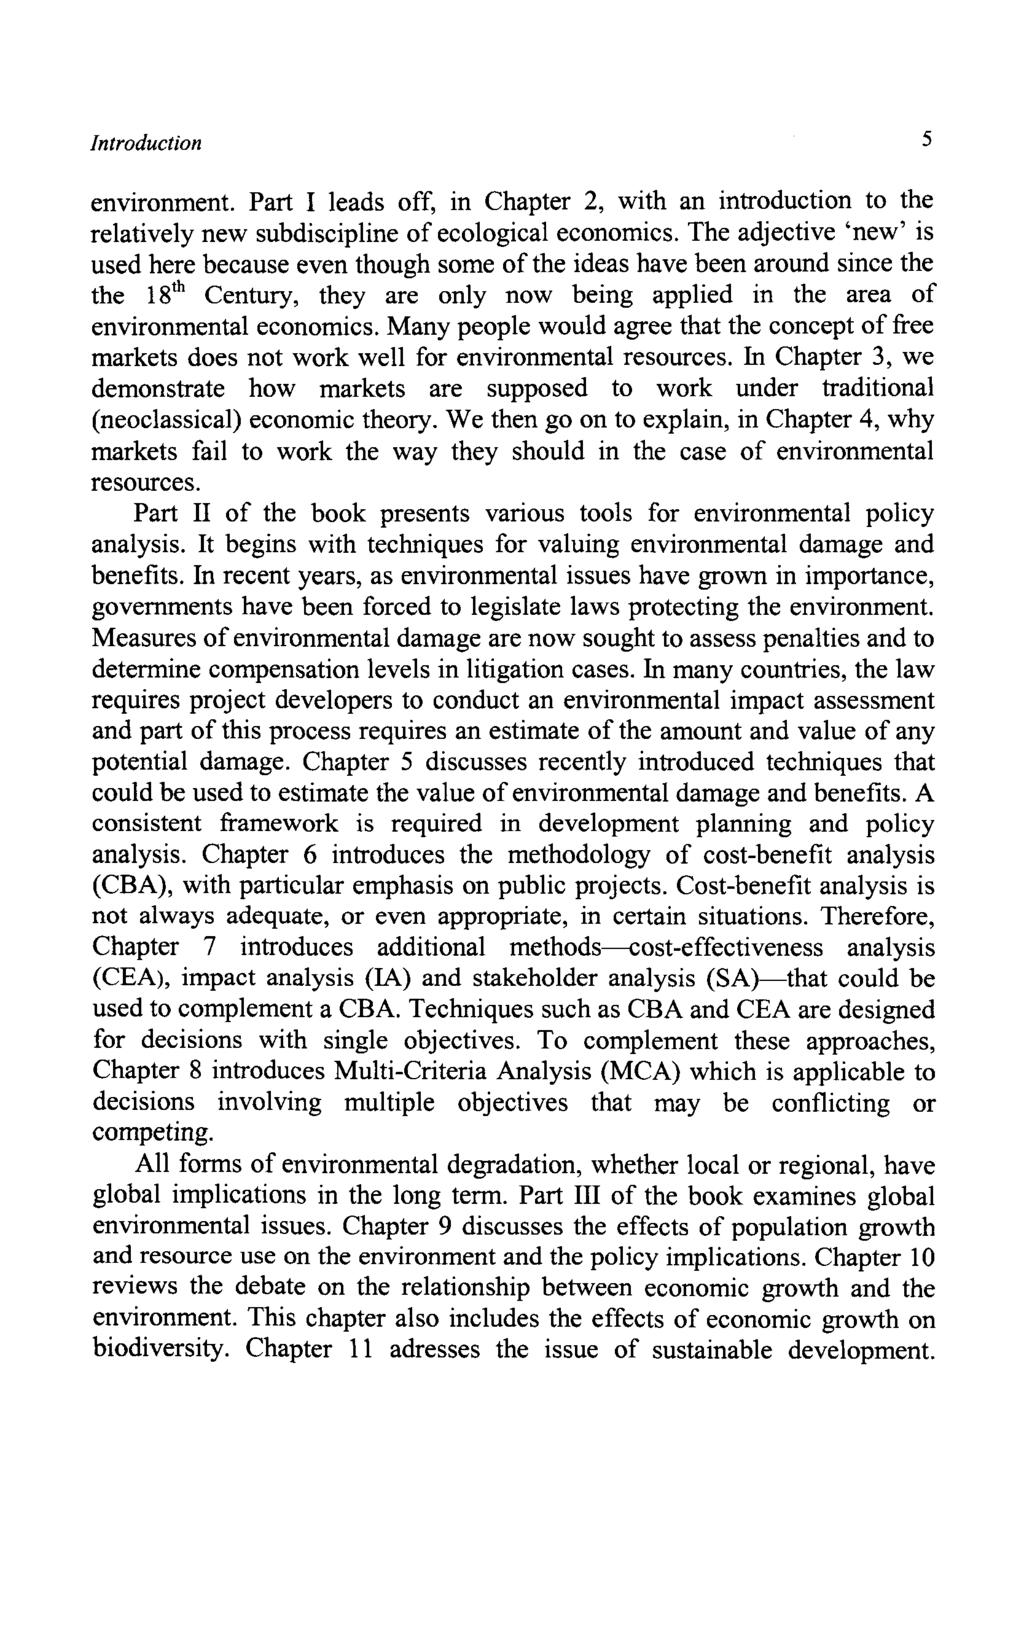 Introduction 5 environment. Part I leads off, in Chapter 2, with an introduction to the relatively new subdiscipline of ecological economics.